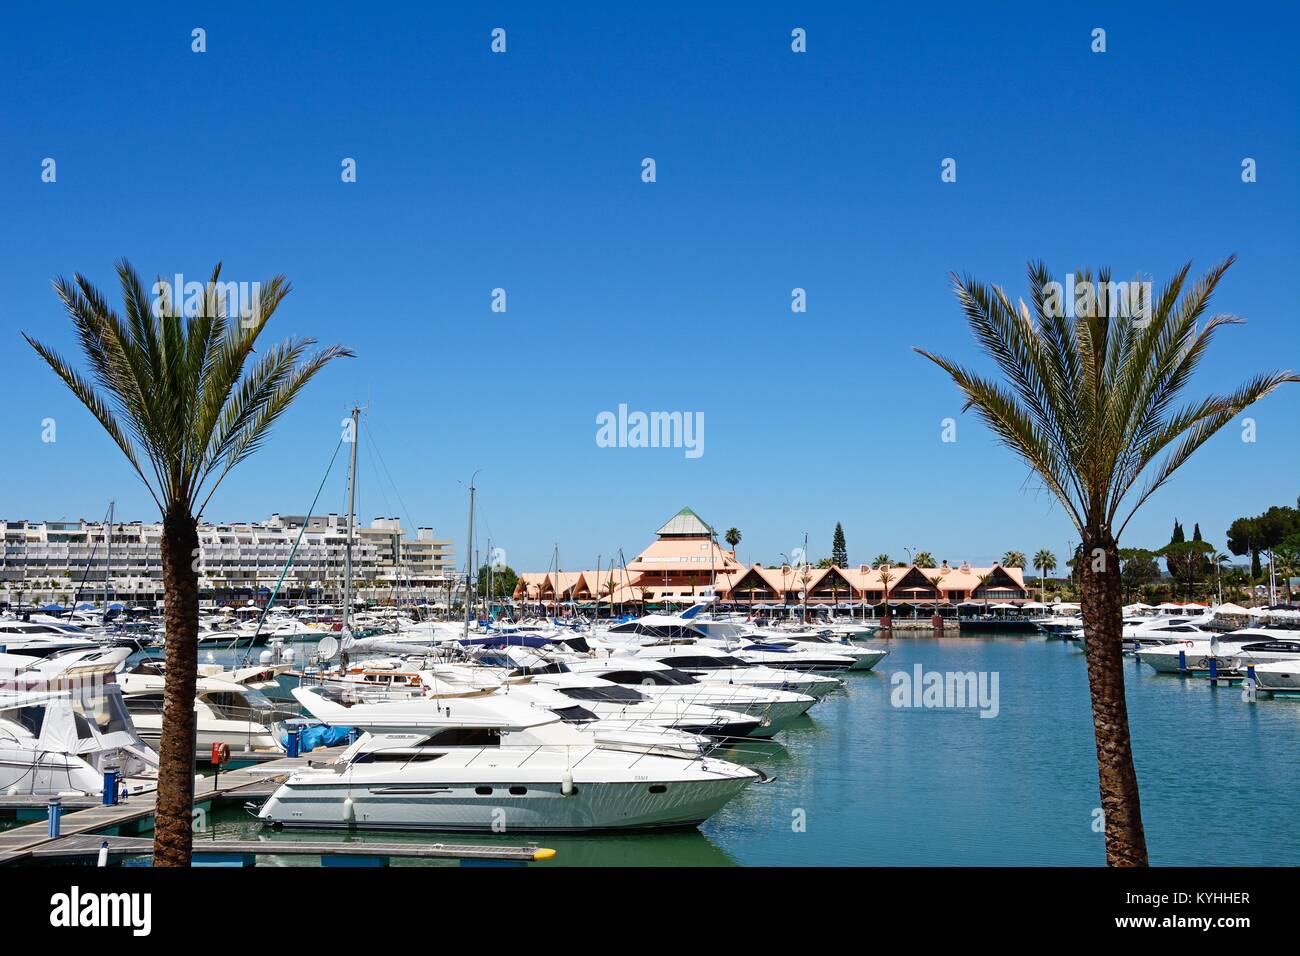 View of yachts in the marina with buildings to the rear, Vilamoura, Algarve, Portugal, Europe. Stock Photo